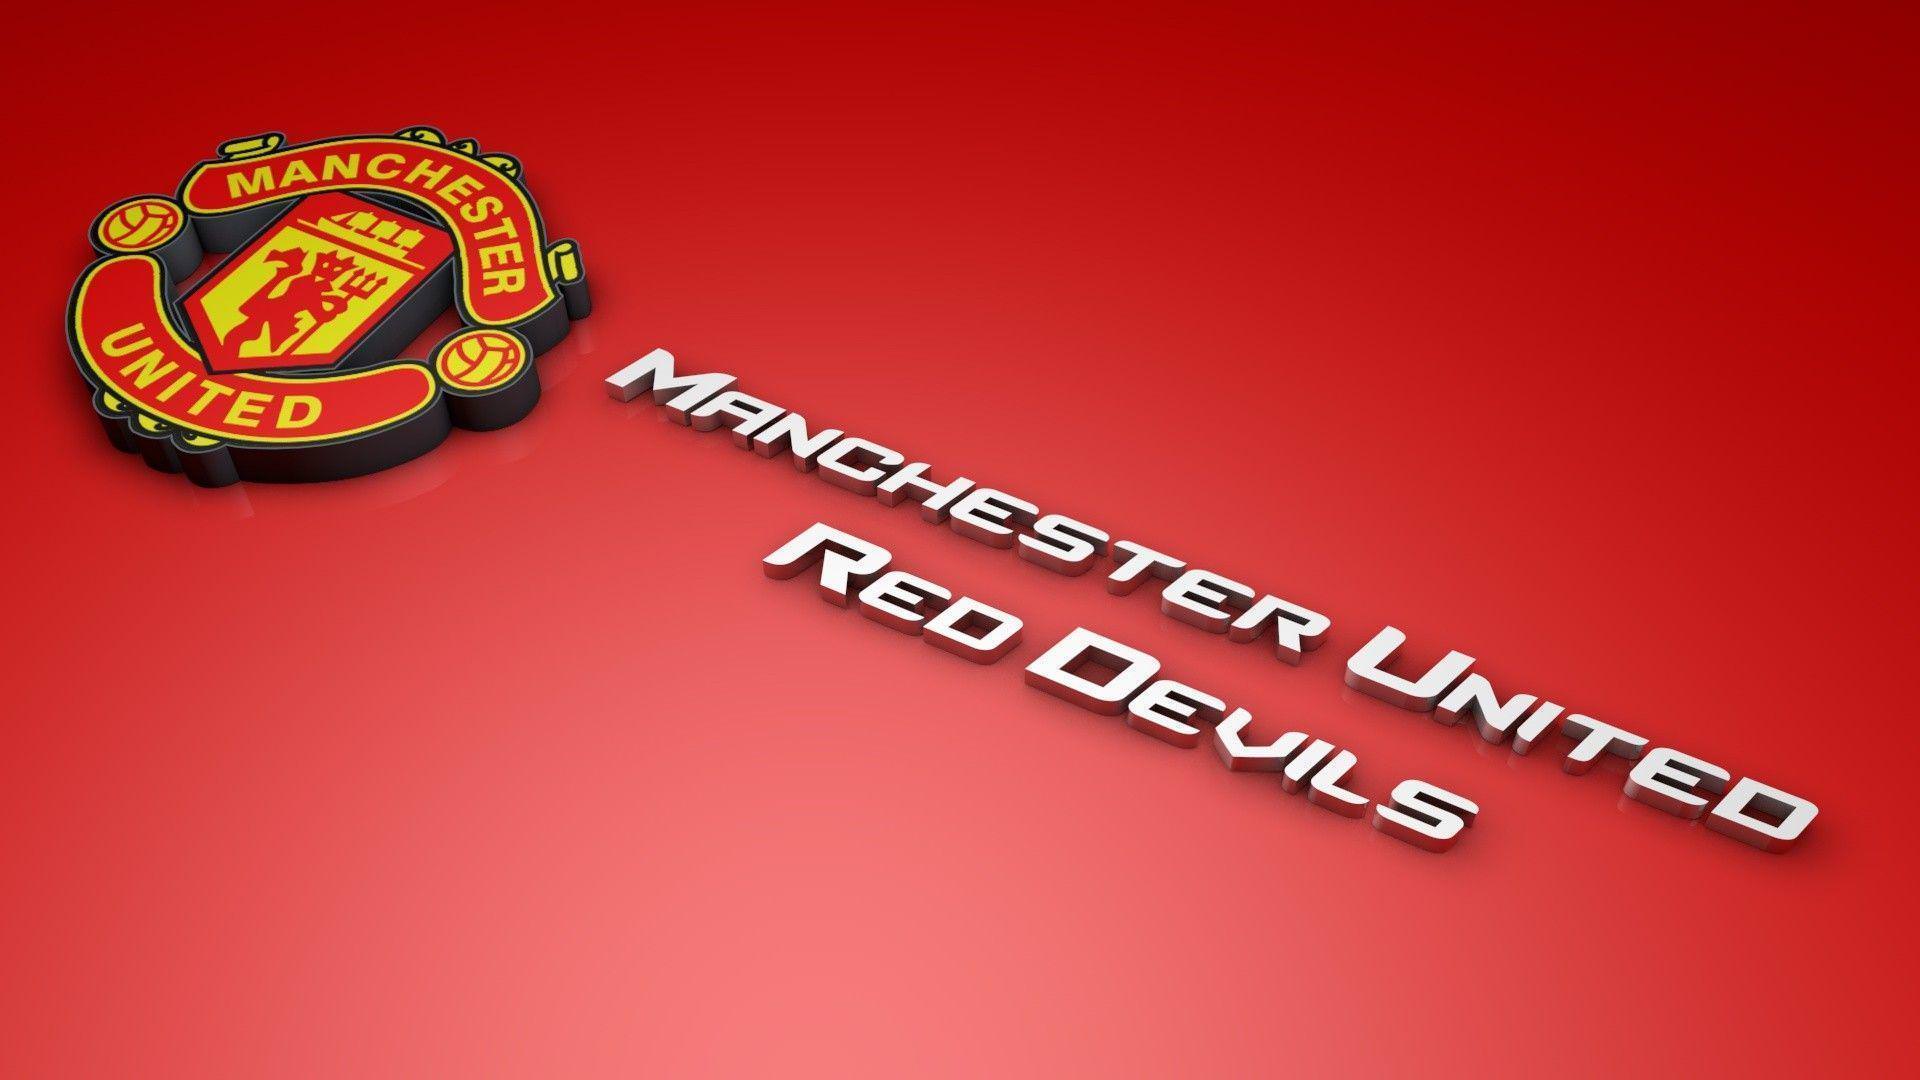 Download Manchester United Logo Wallpapers Wallpaper 